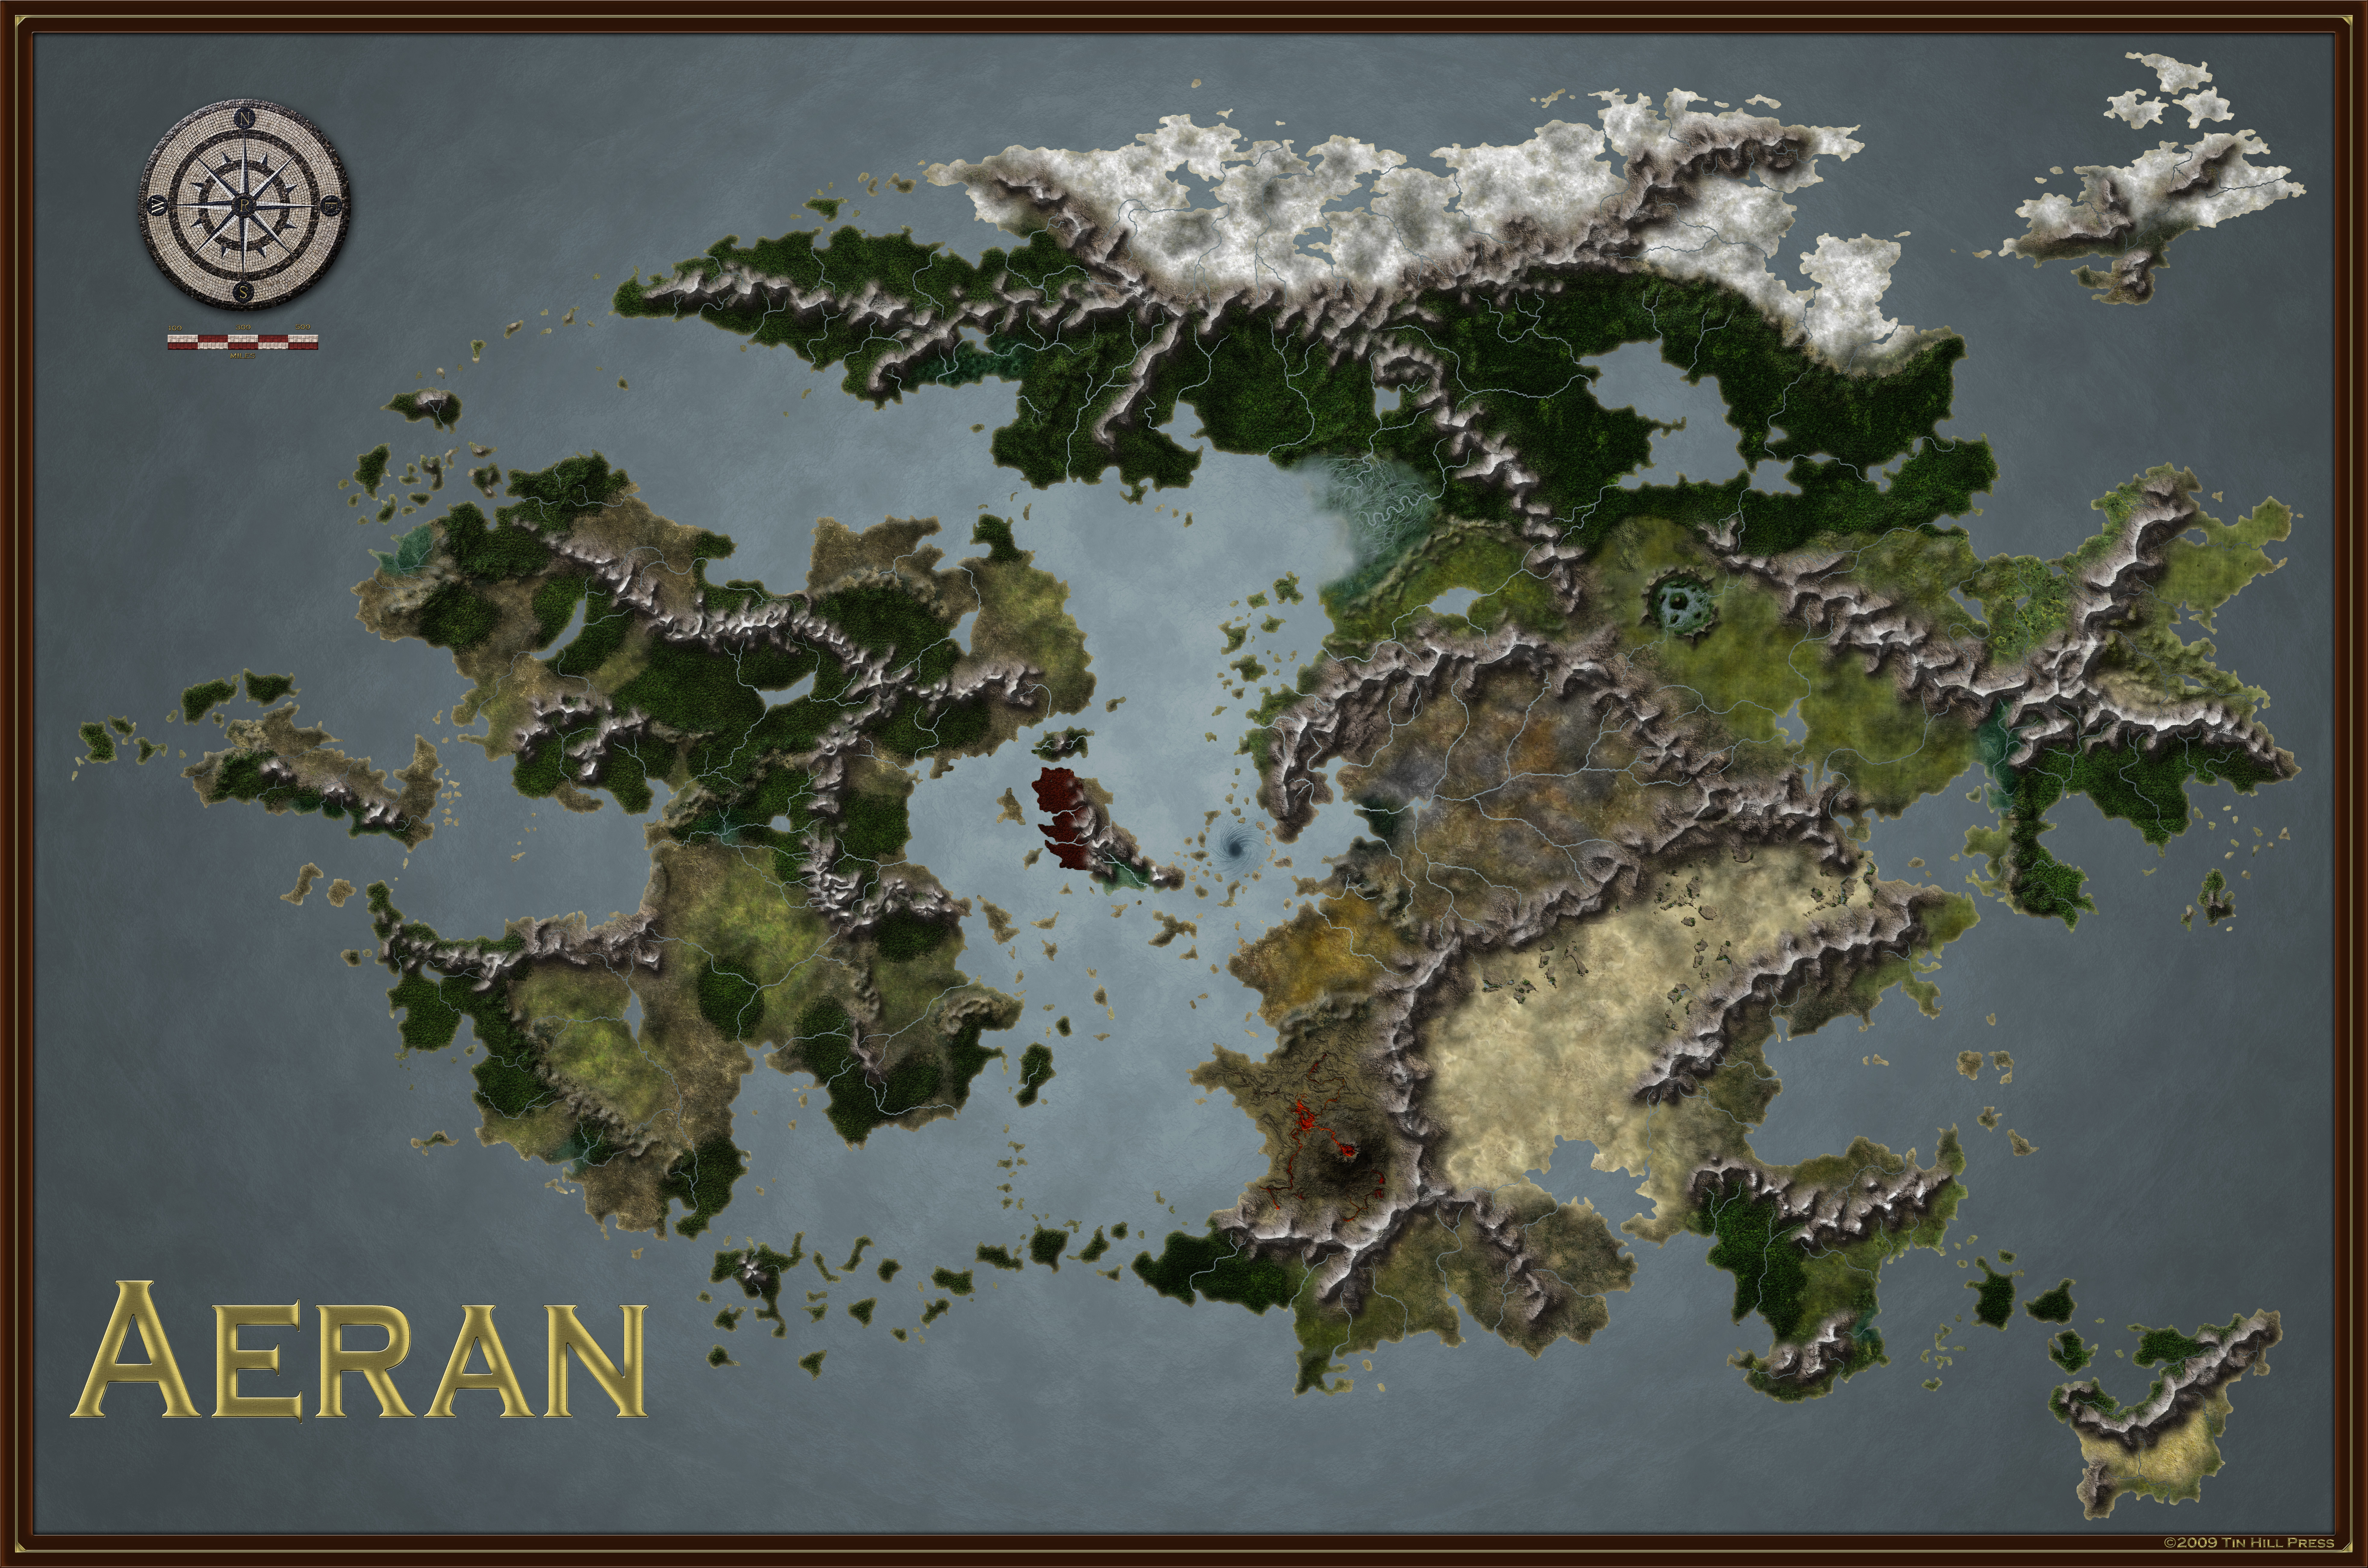 The_World_of_Aeran_by_coyotemax.jpg